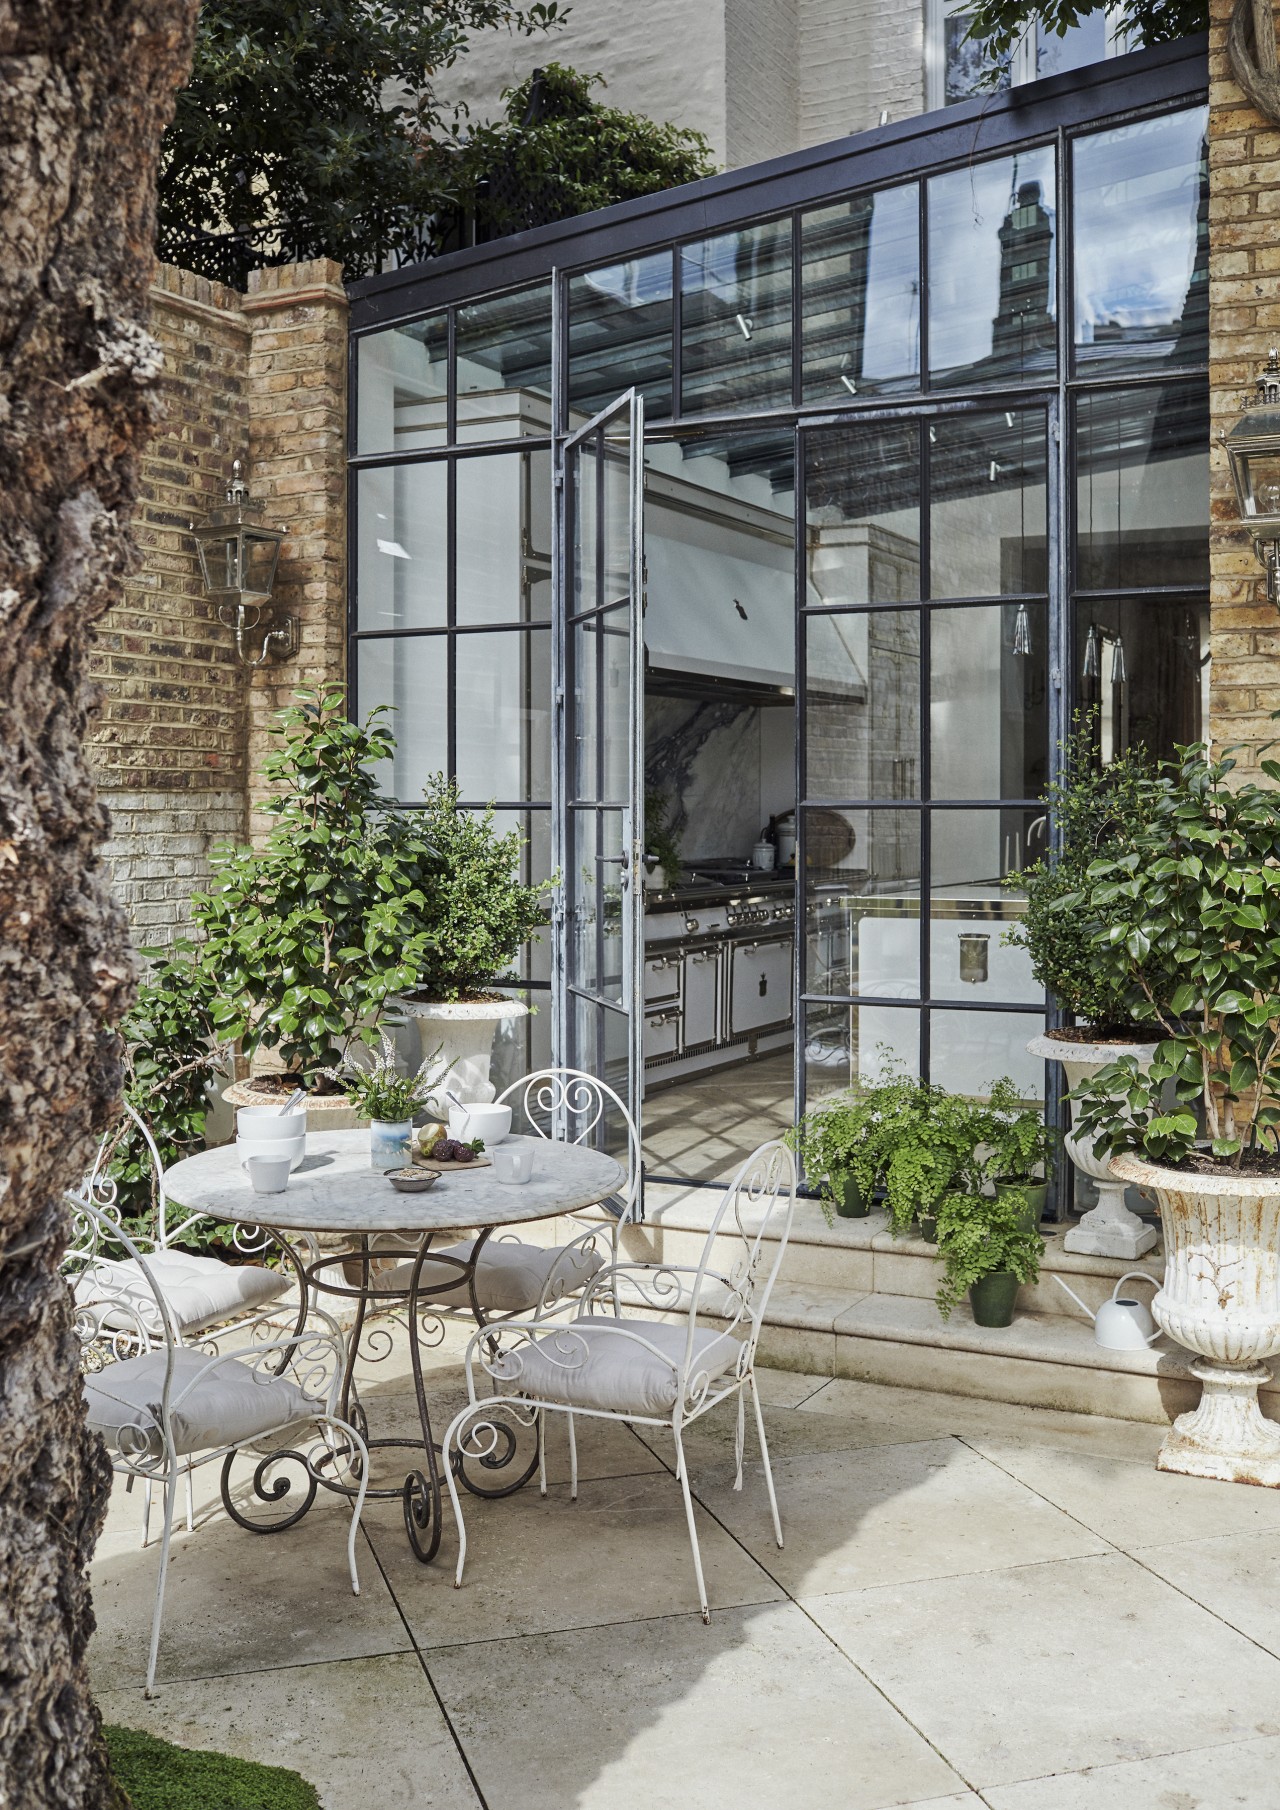 A grand private courtyard garden connects the Main 